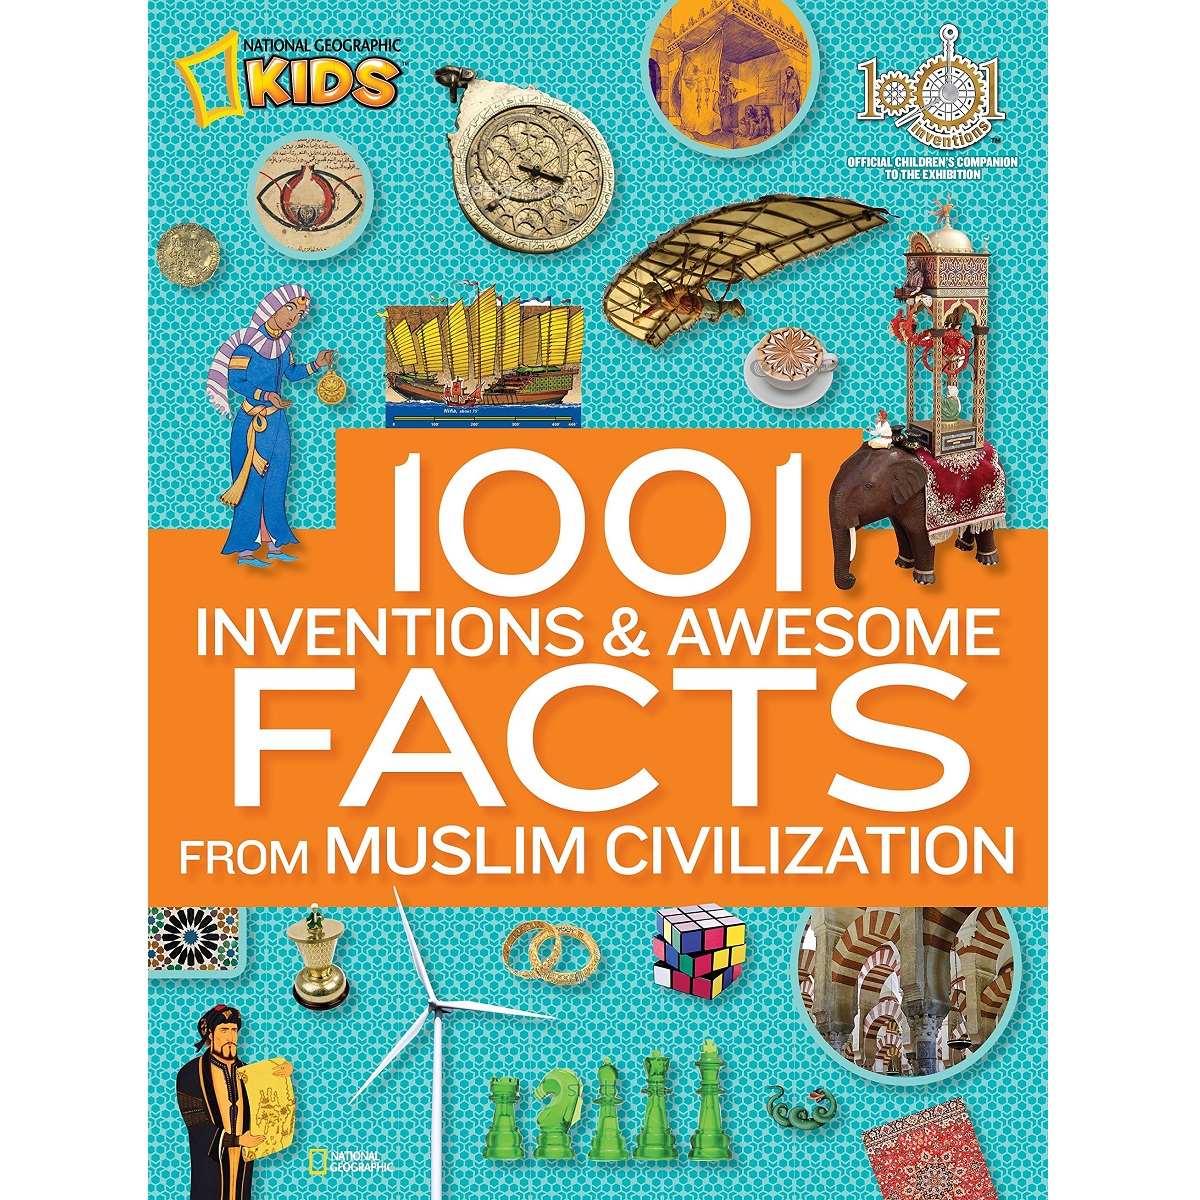 1001 Inventions and Awesome Facts from Muslim Civilization By National Geographic Kids